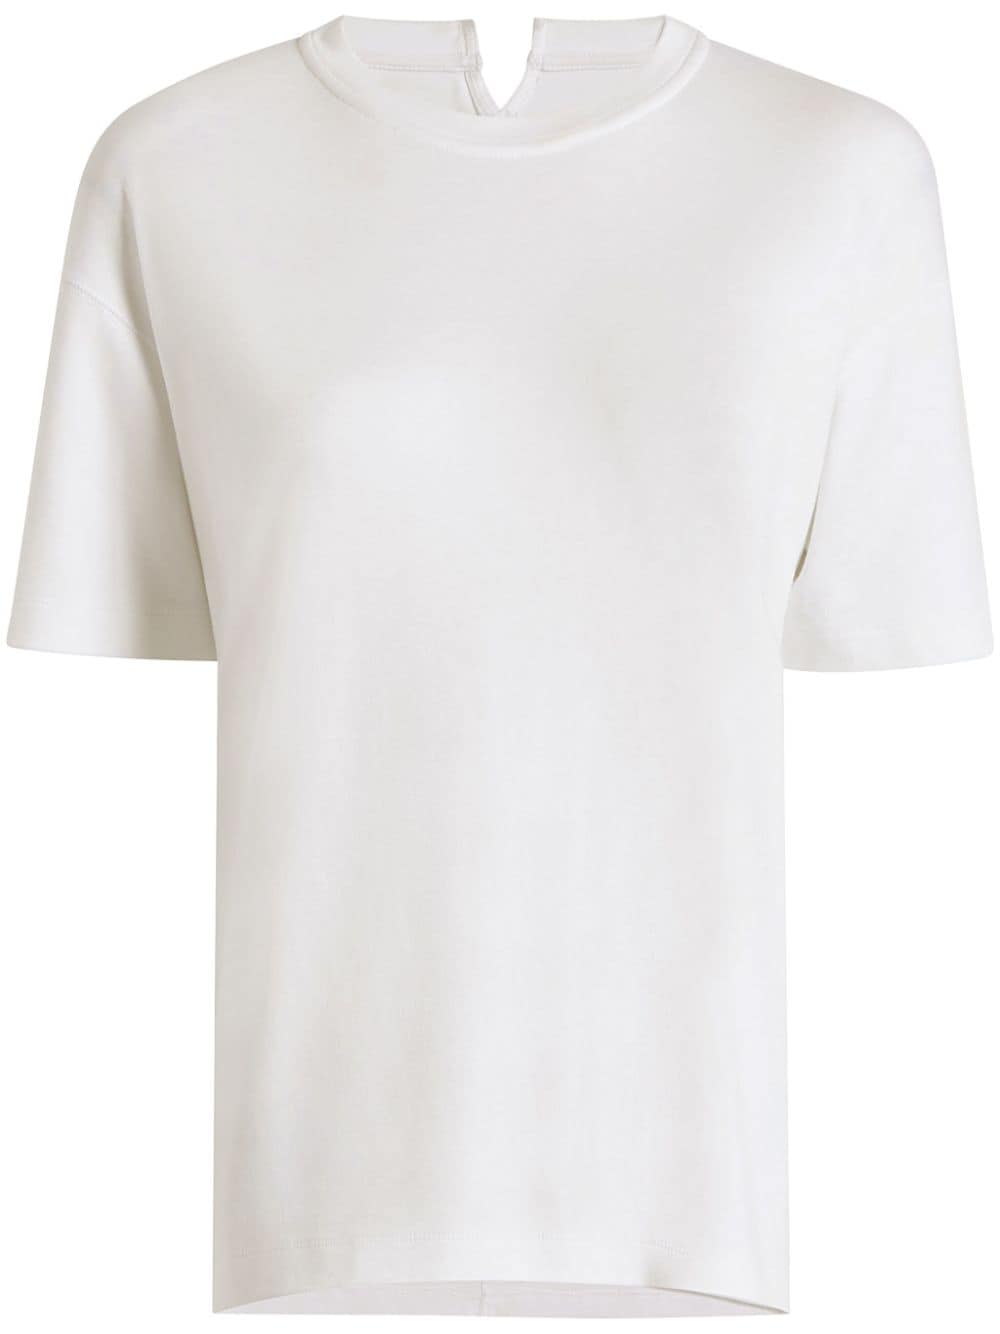 Another Tomorrow Luxe Seamed cotton T-shirt - White von Another Tomorrow